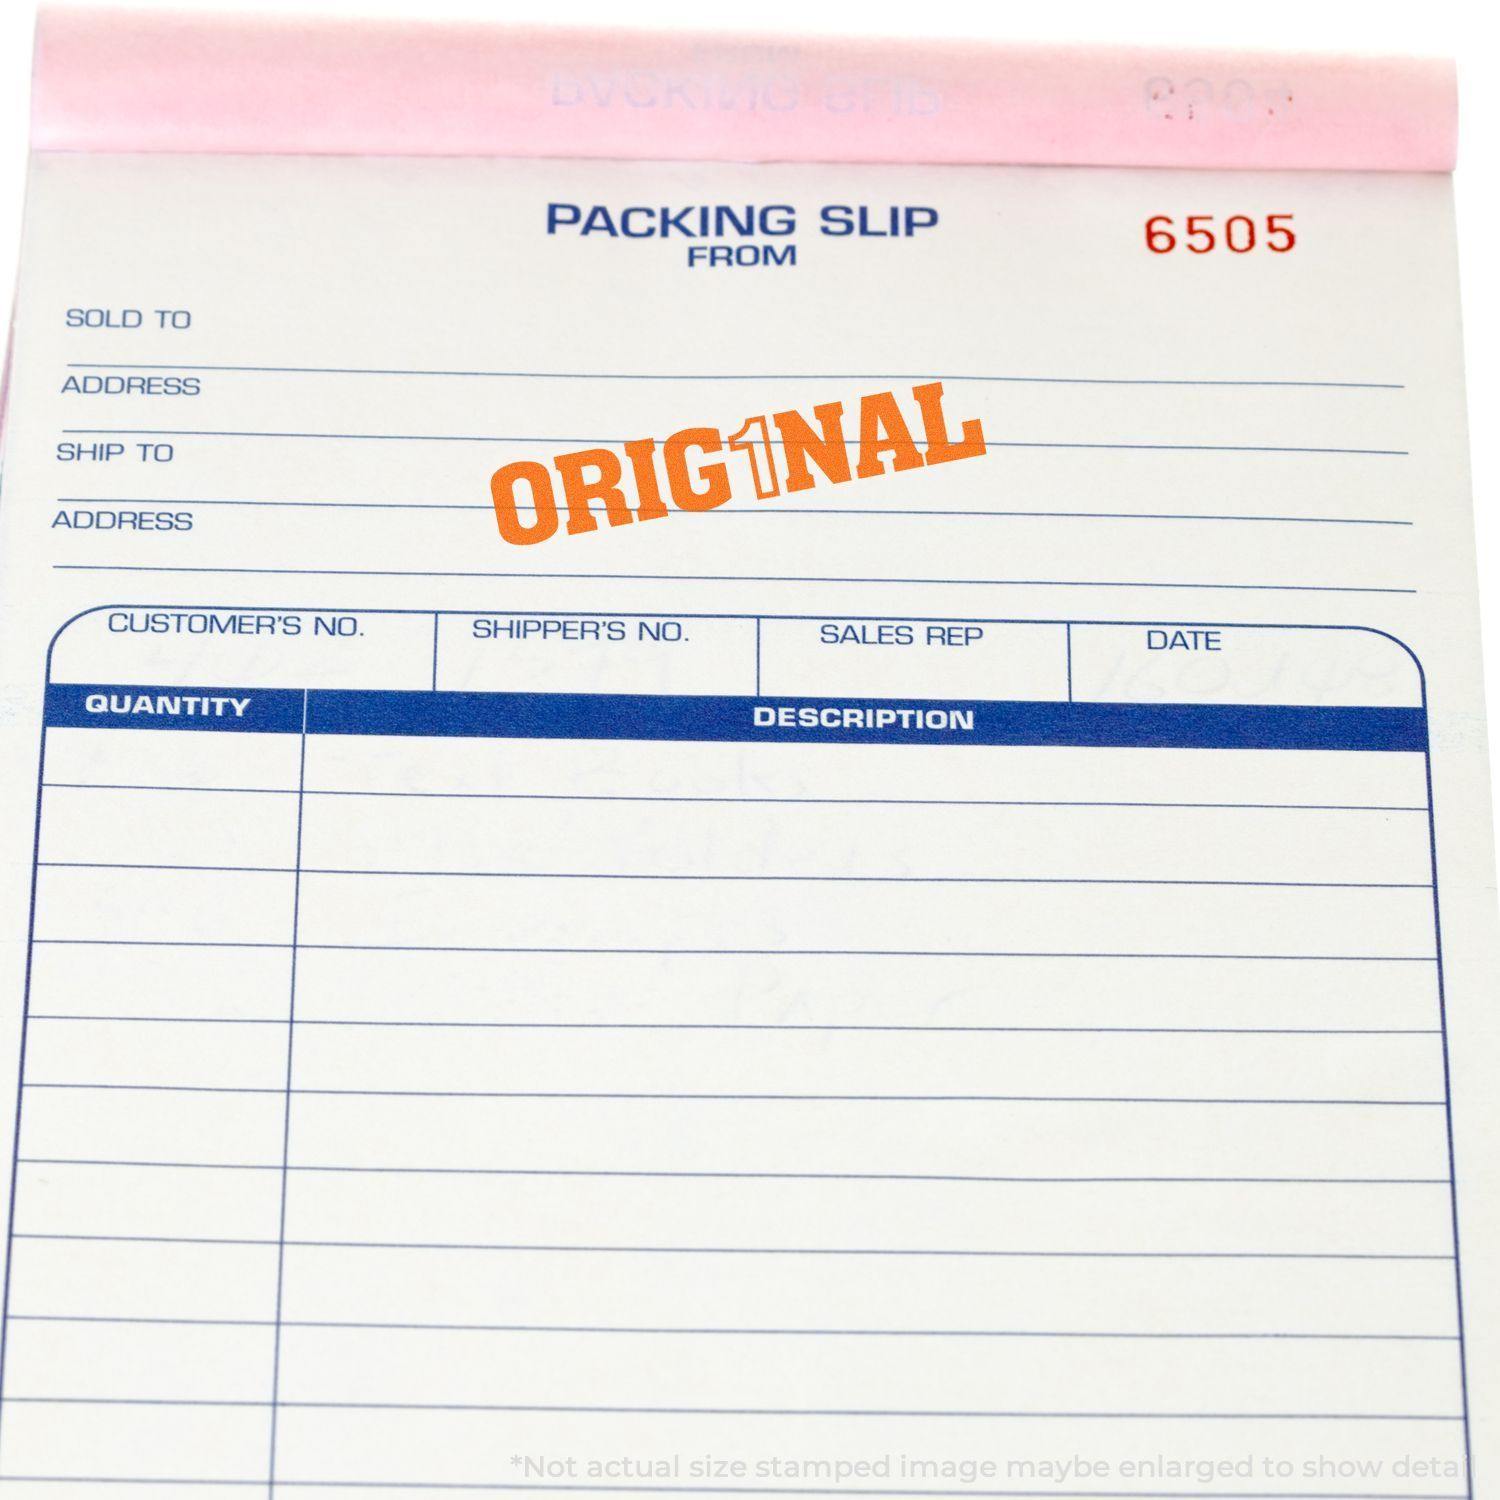 A stock office rubber stamp with a stamped image showing how the text "ORIG1NAL" is displayed after stamping.